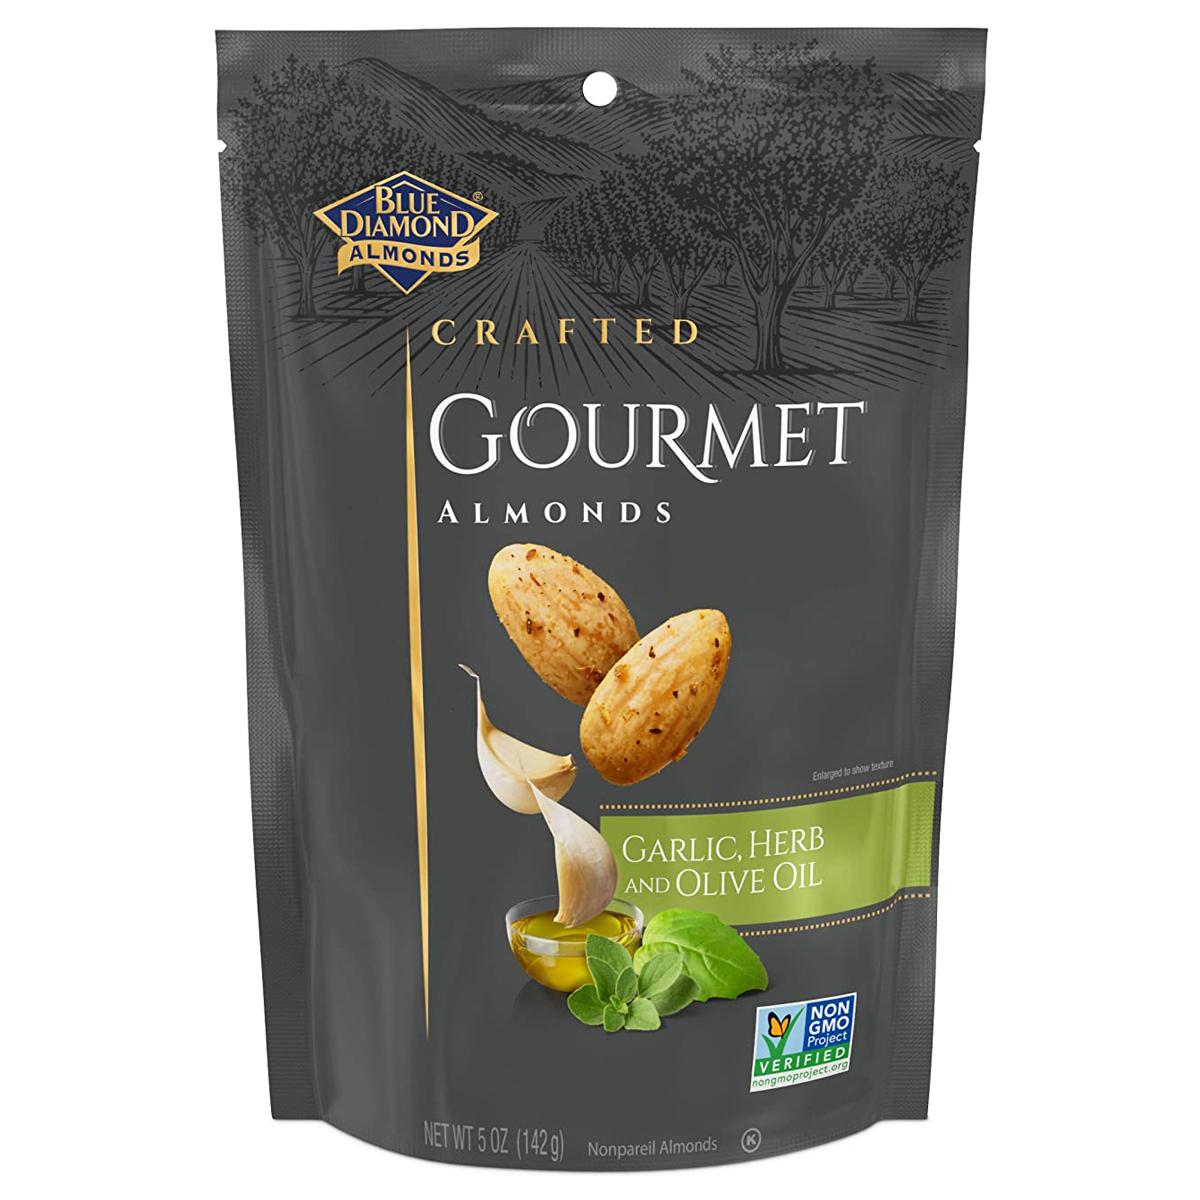 10oz Blue Diamond Garlic Herb and Olive Oil Almond Nuts $4.49 Shipped